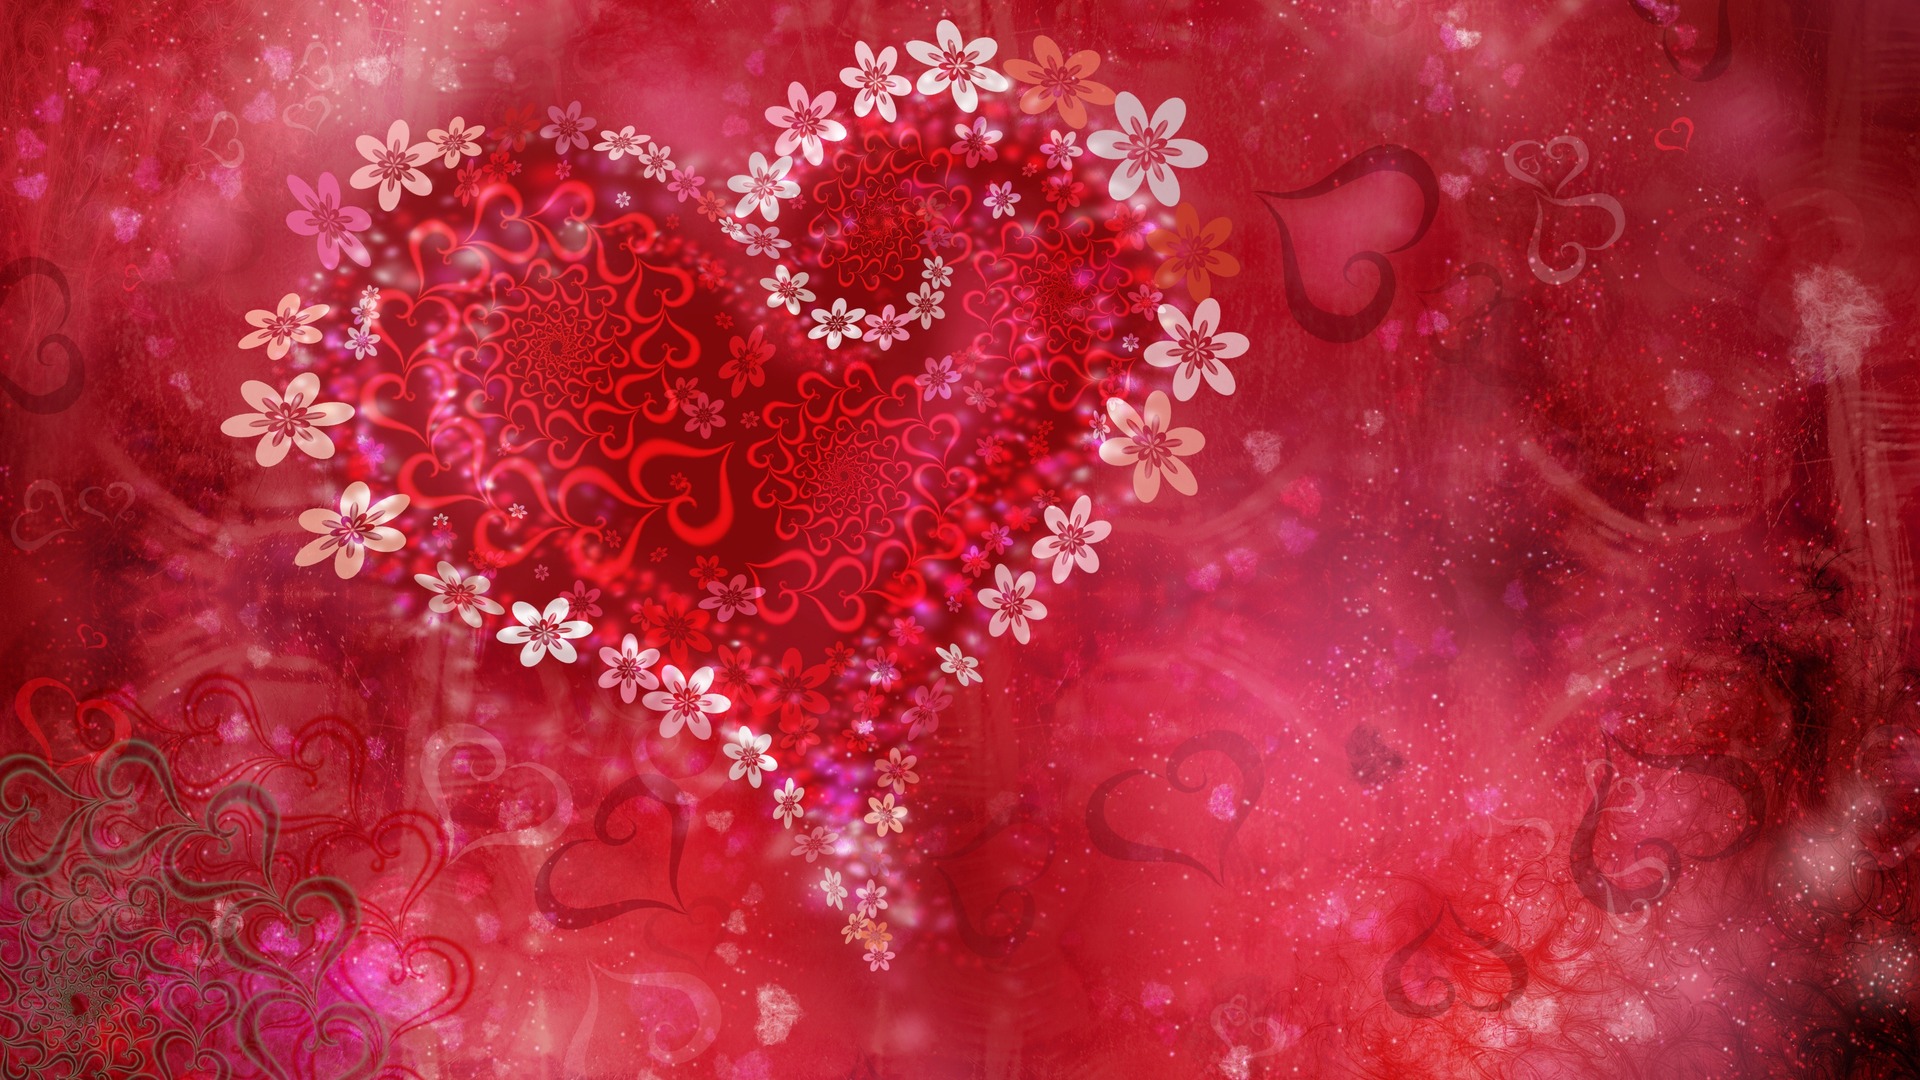 Happy Valentines Day HD Wallpaper High Definition Quality